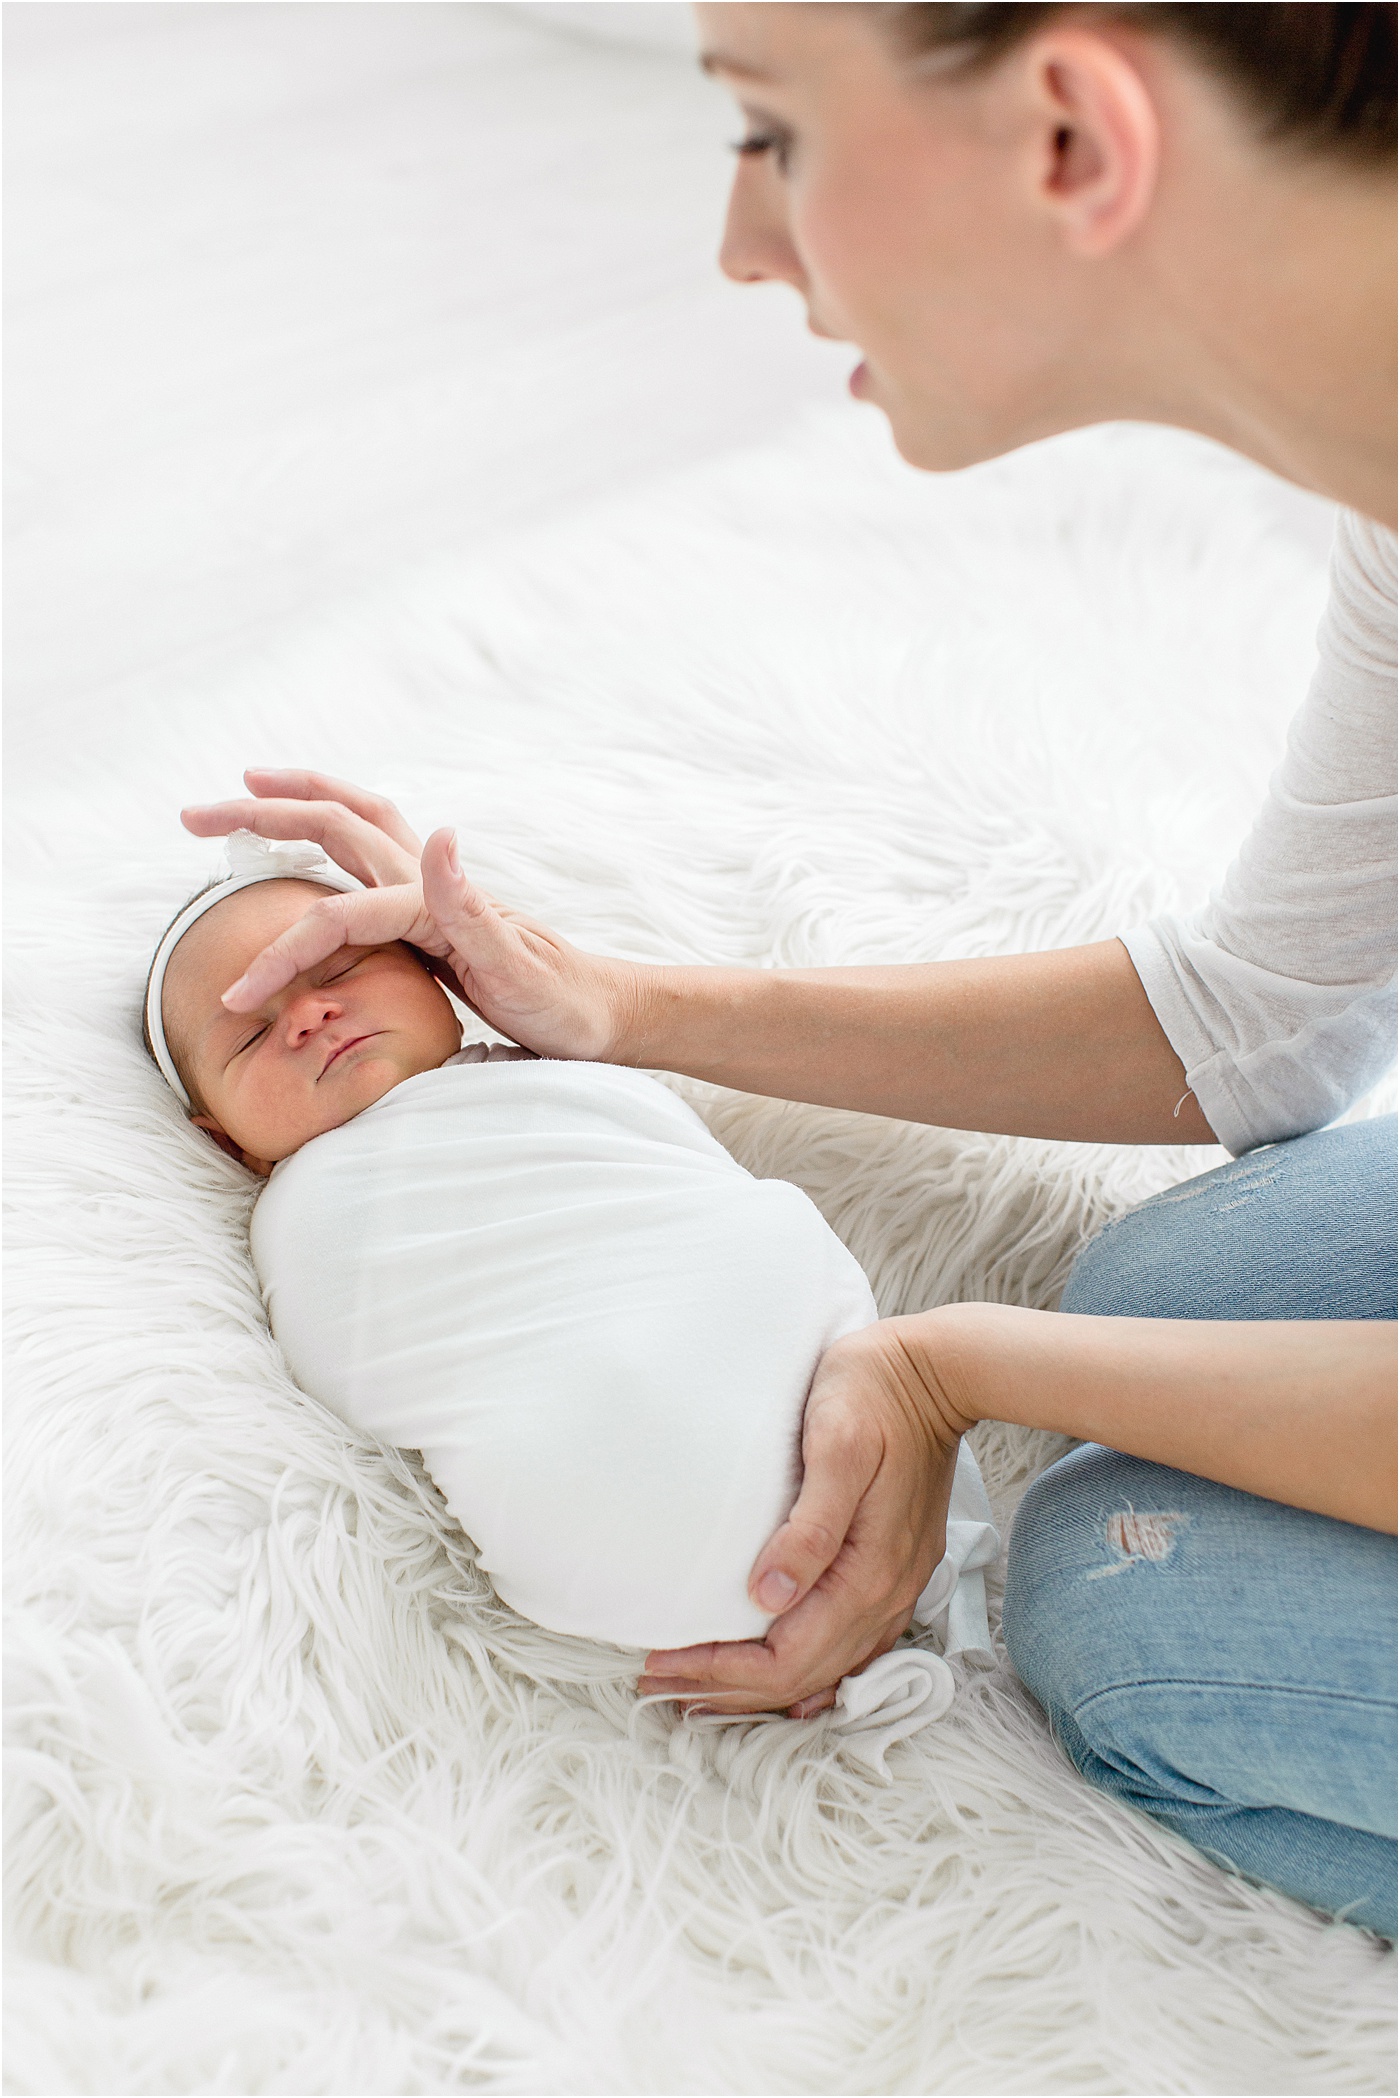 Brittany Elise Photography soothing baby to sleep during newborn session in Tampa, FL.